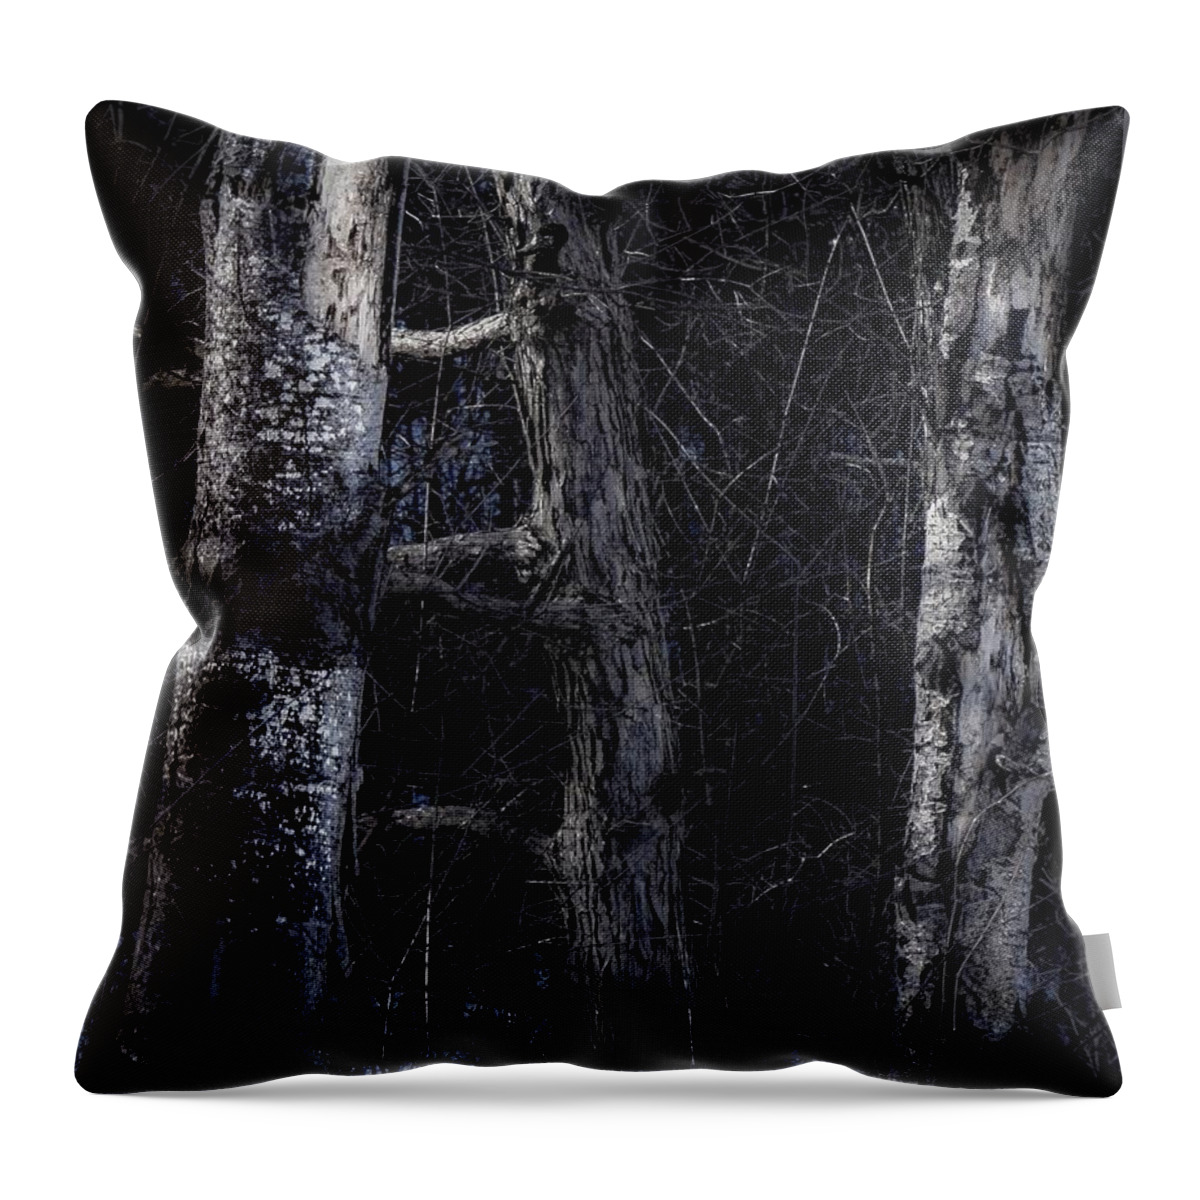  Throw Pillow featuring the photograph All Bark by Kendall McKernon